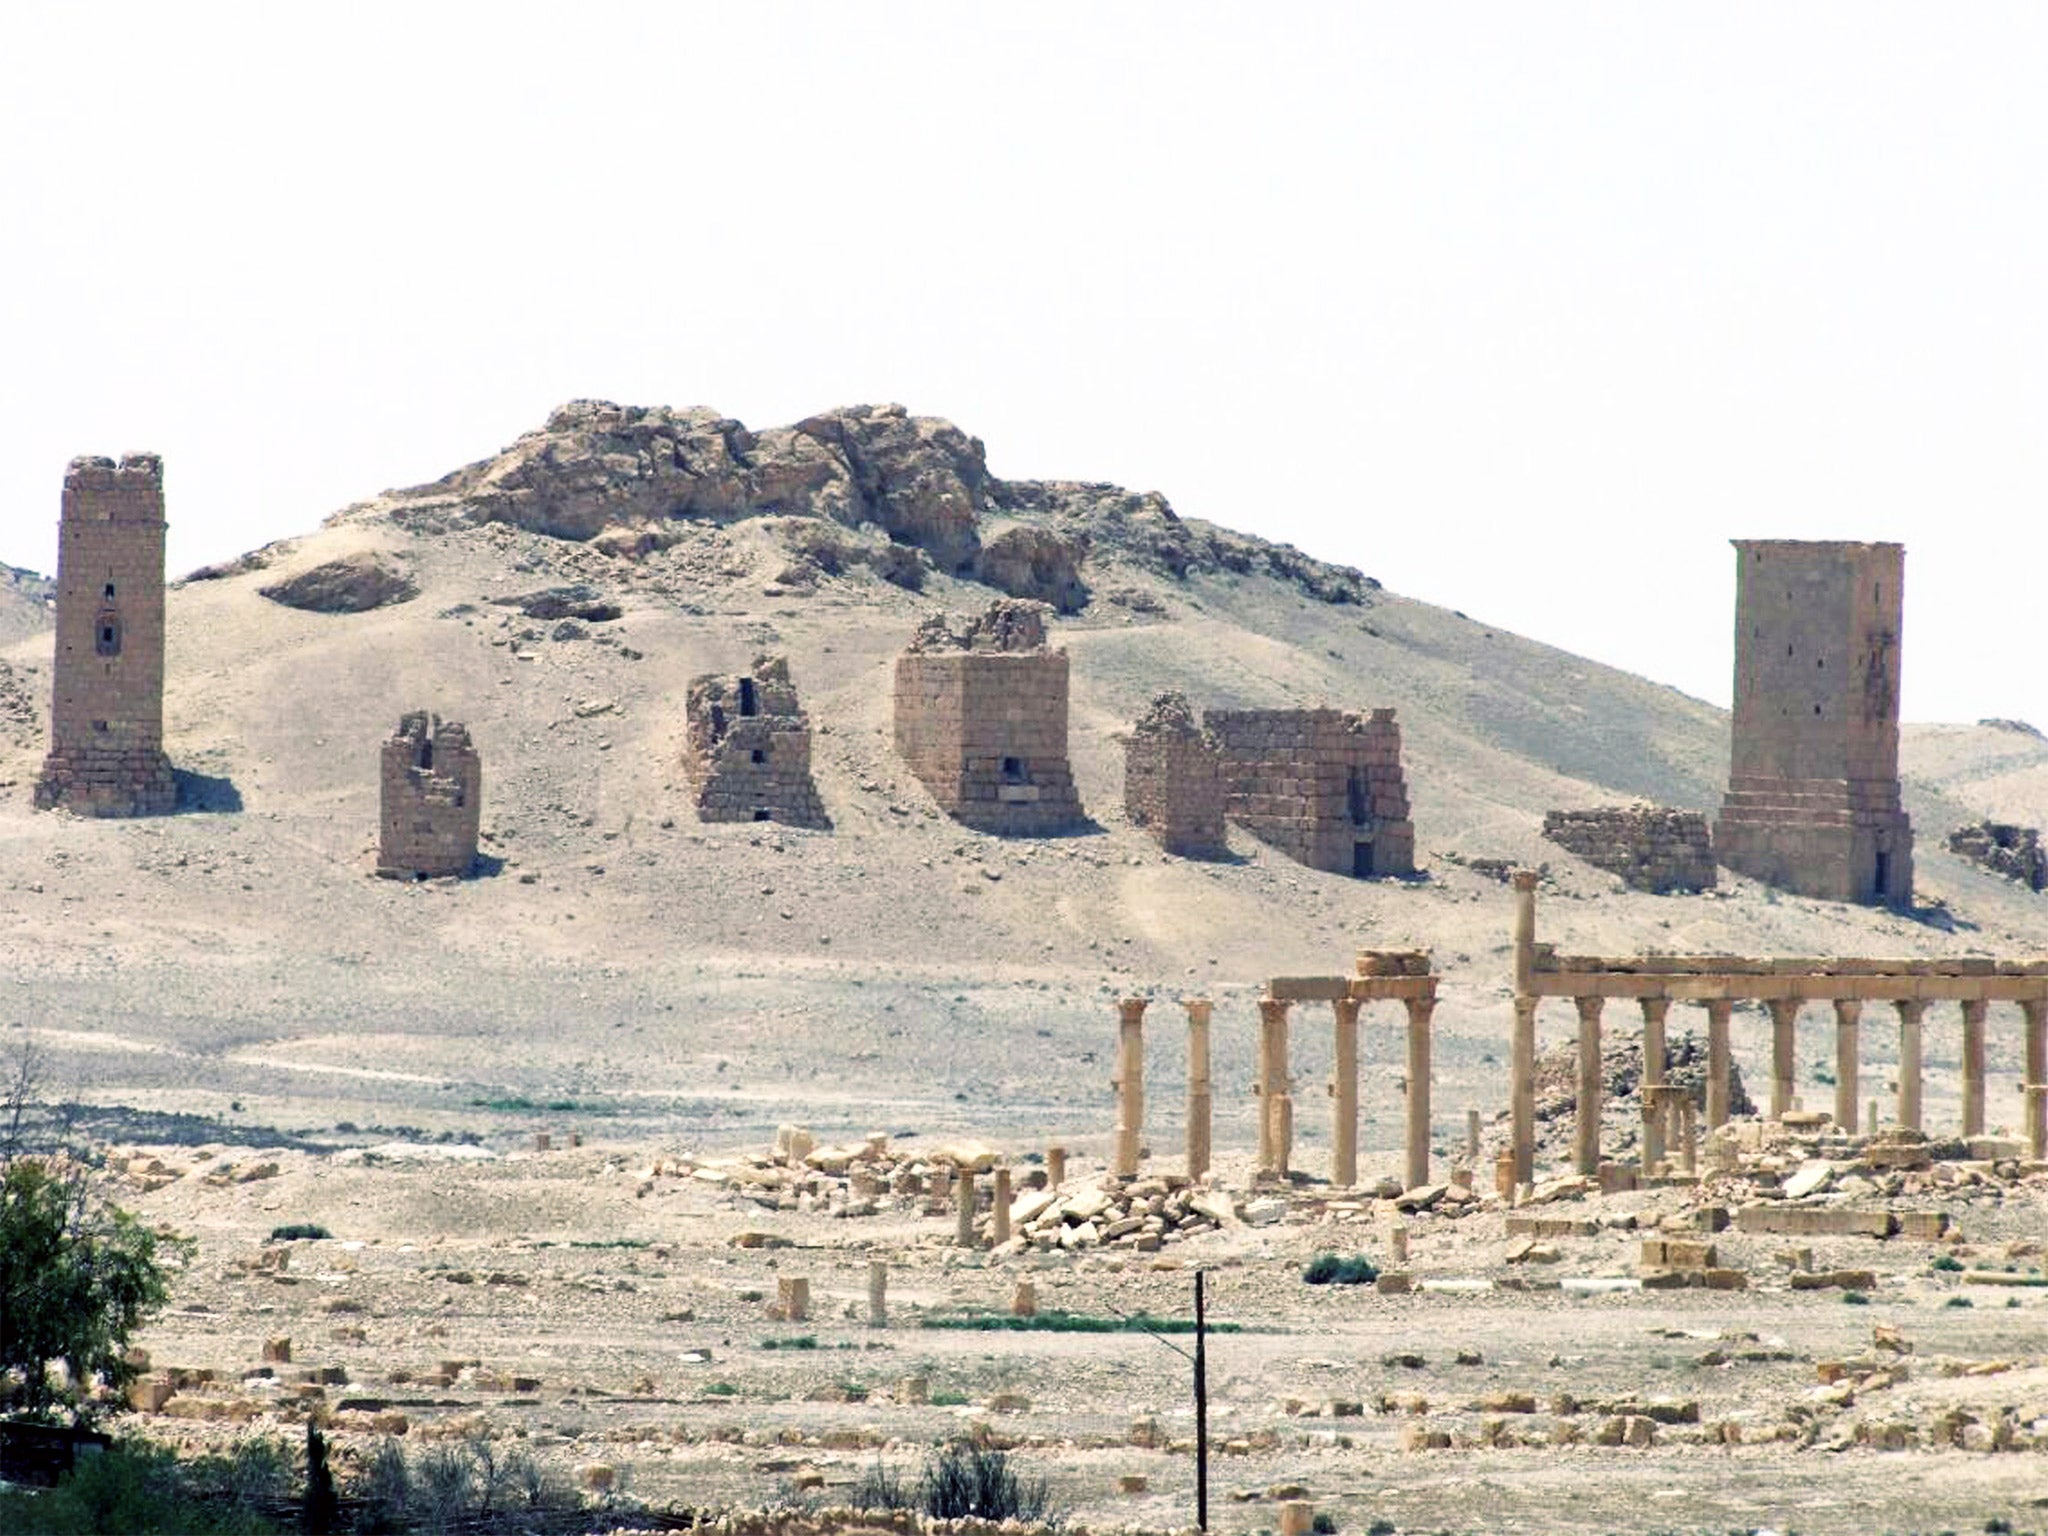 The ancient Roman city of Palmyra, pictured earlier this summer